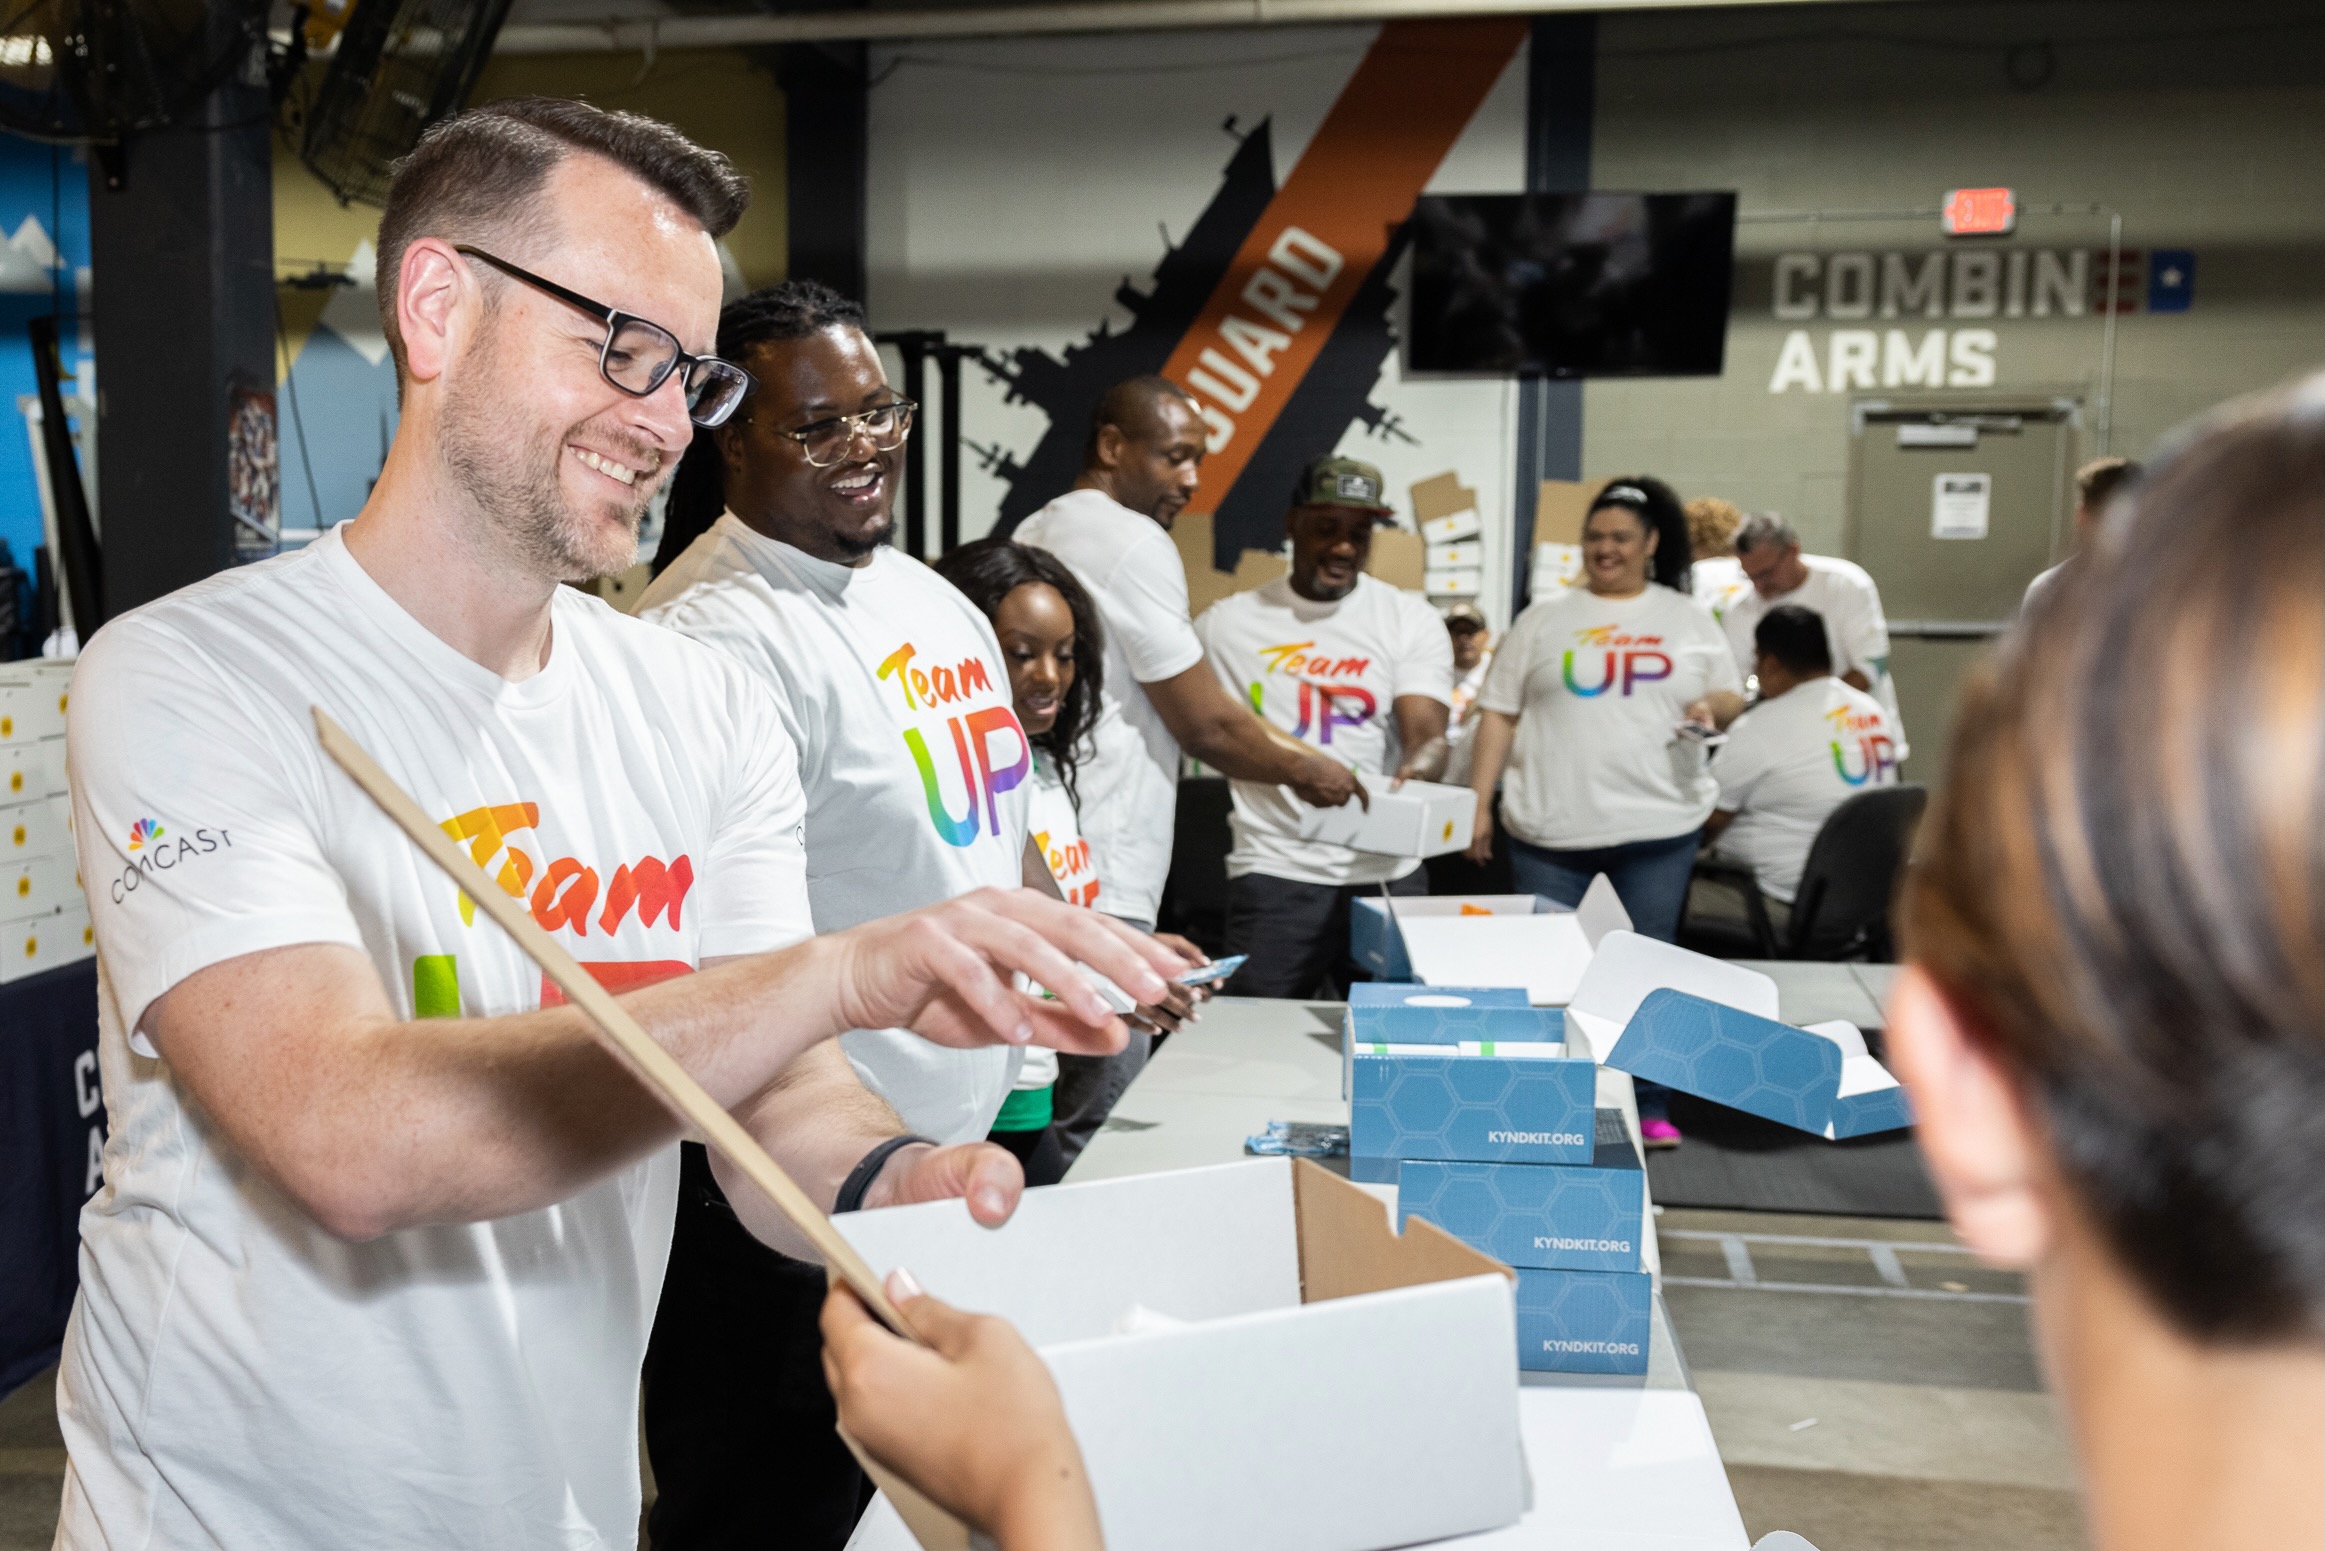 A Comcast volunteers helps to box a hygiene kit for a veteran at Combined Arms in Houston, Texas.